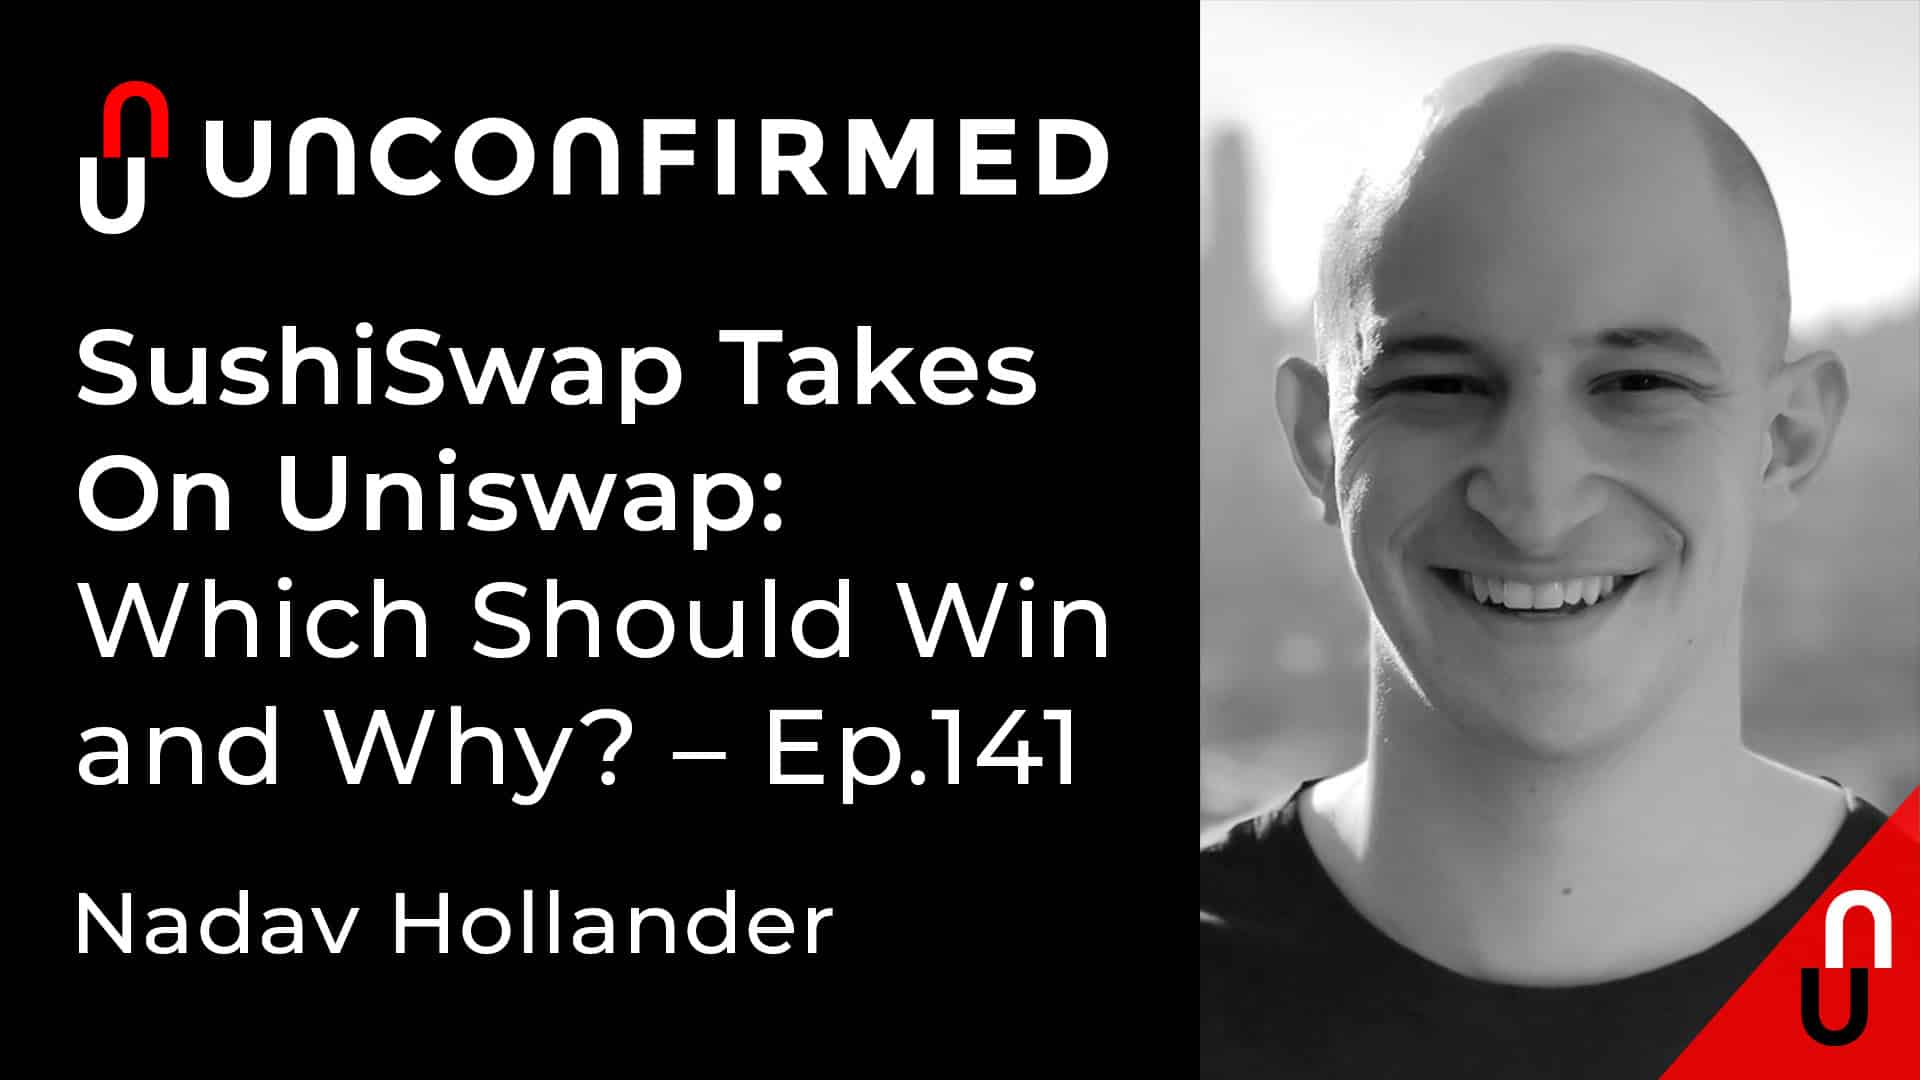 Unconfirmed - Ep.141 - SushiSwap Takes On Uniswap - Which Should Win and Why?